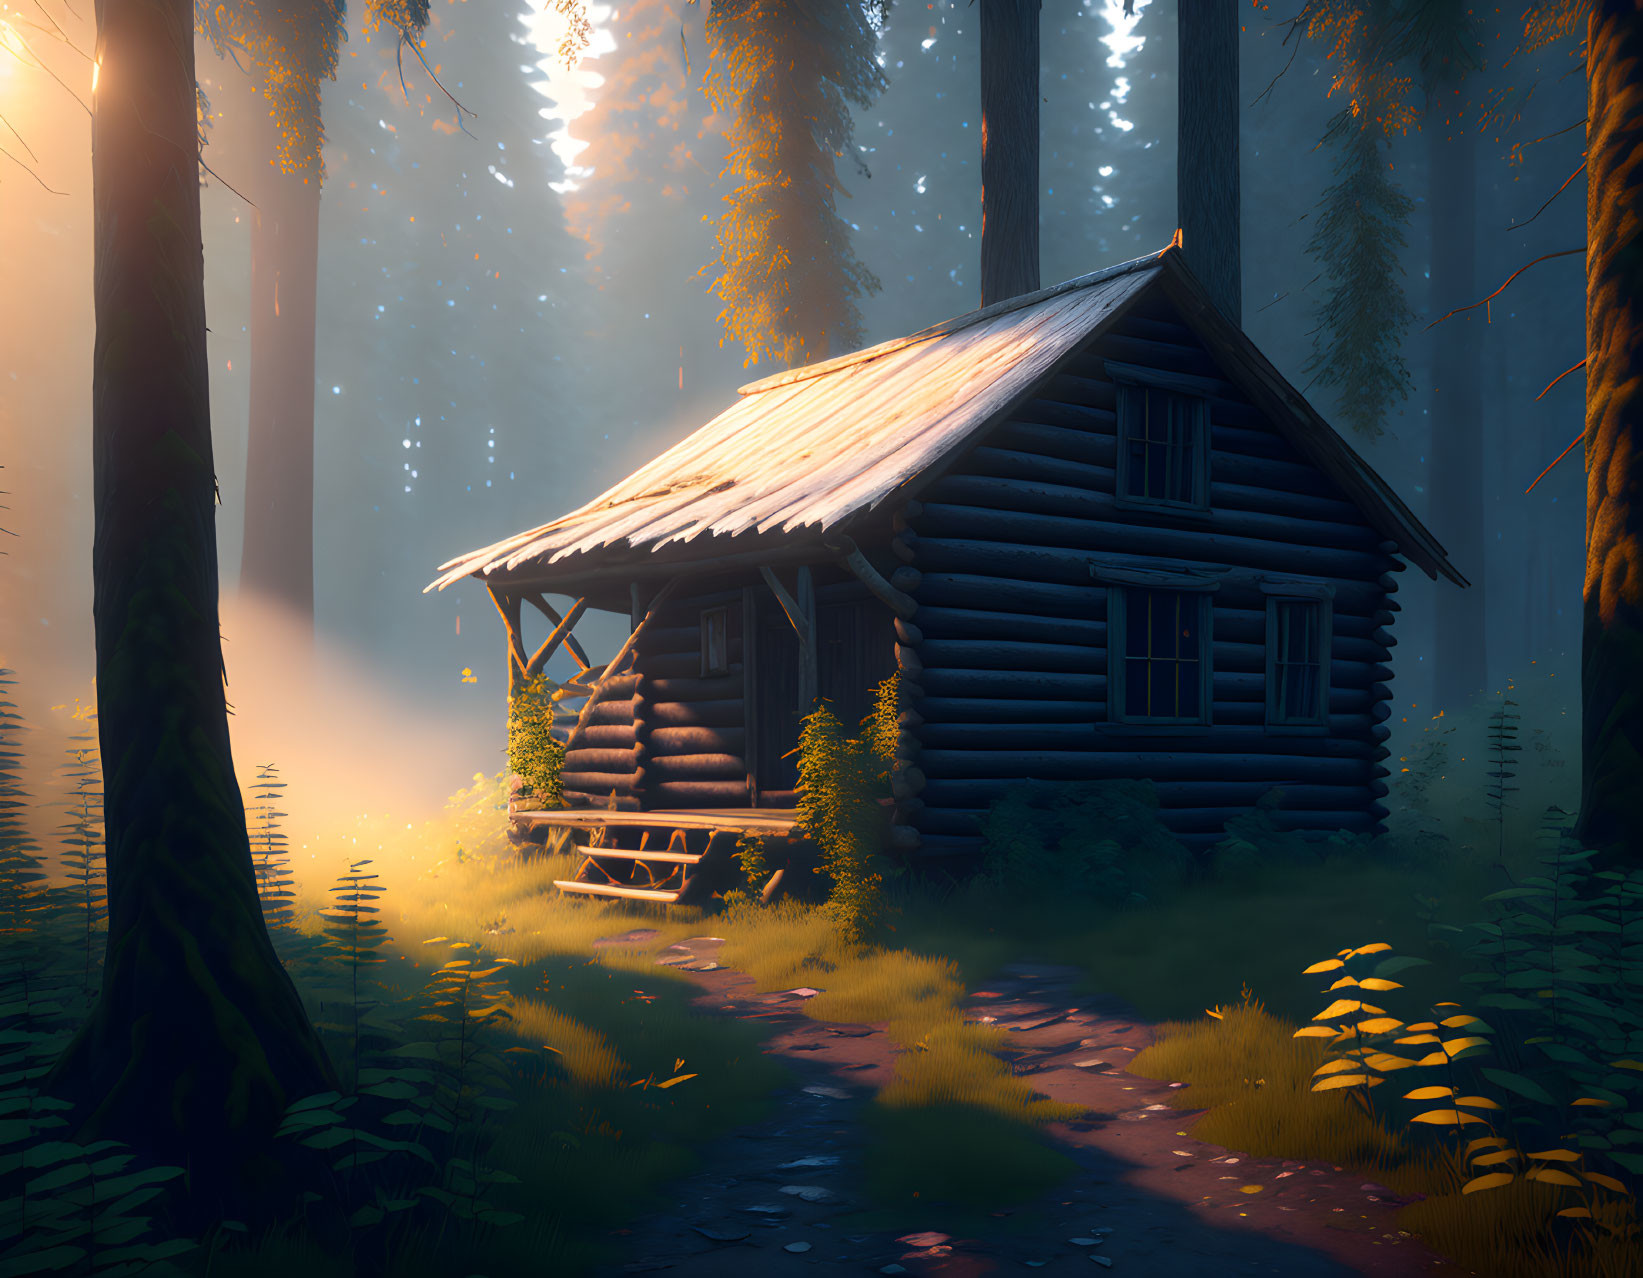 Misty forest scene with wooden cabin in sunlight